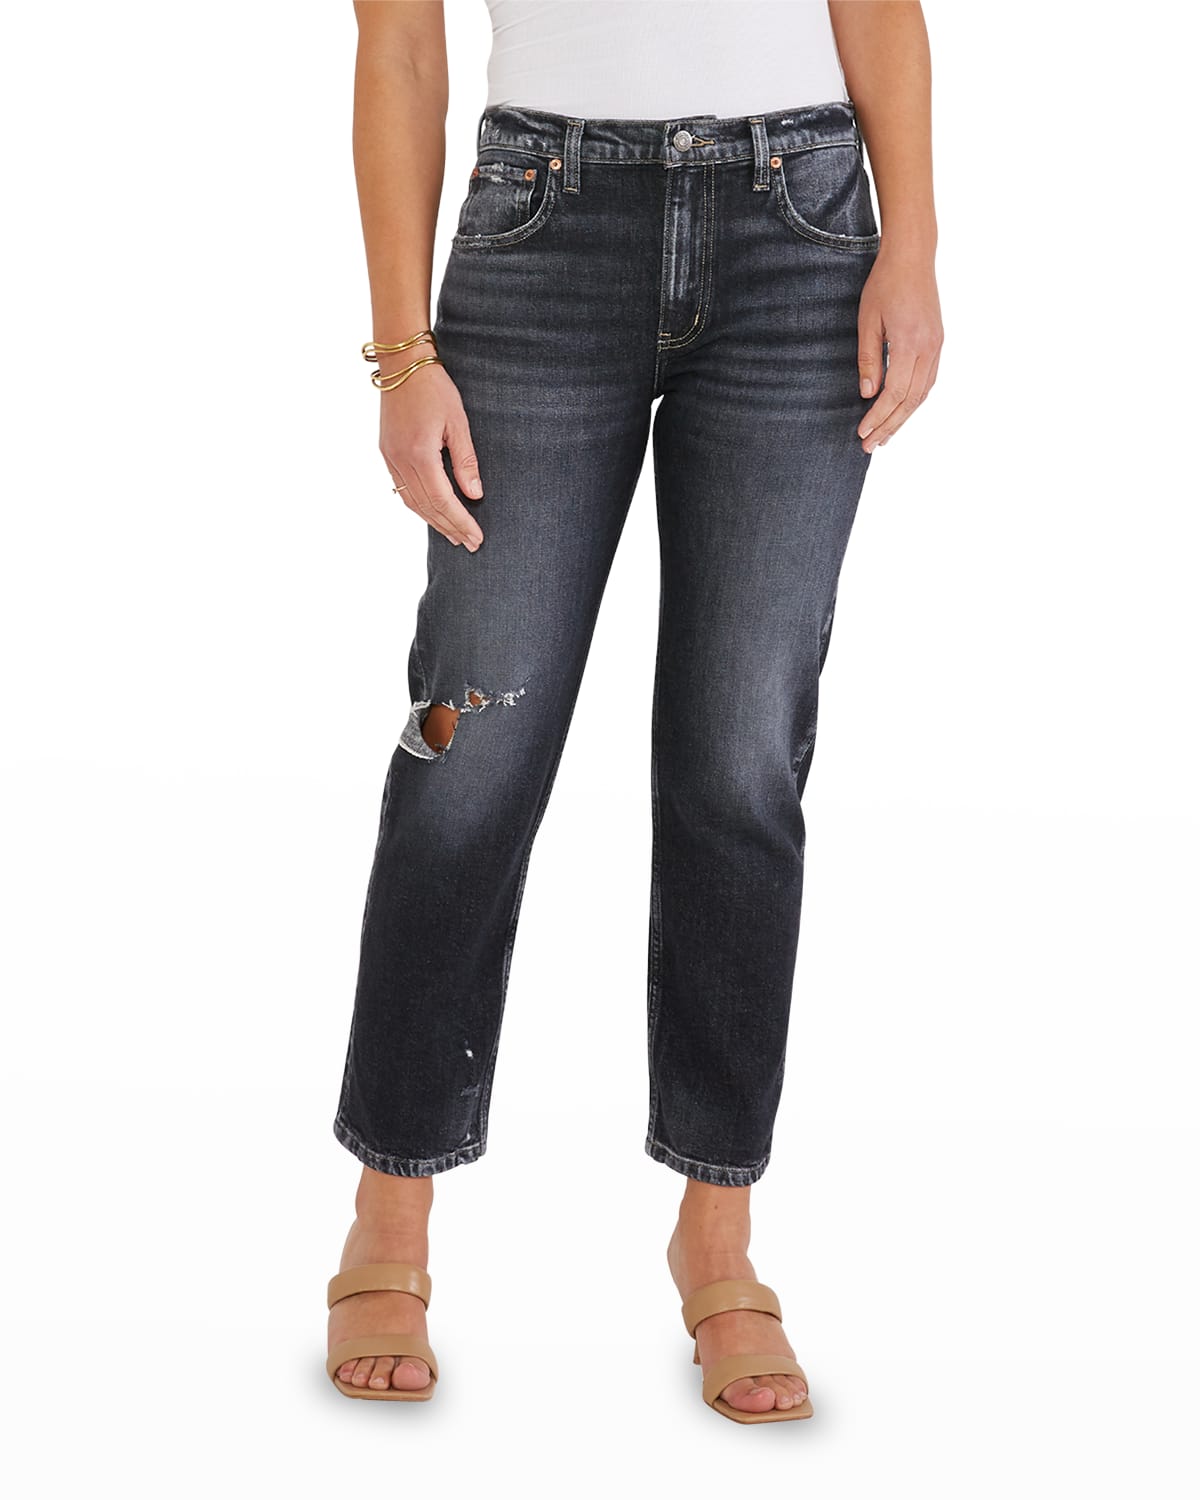 ETICA Rae Distressed Straight Cropped Jeans